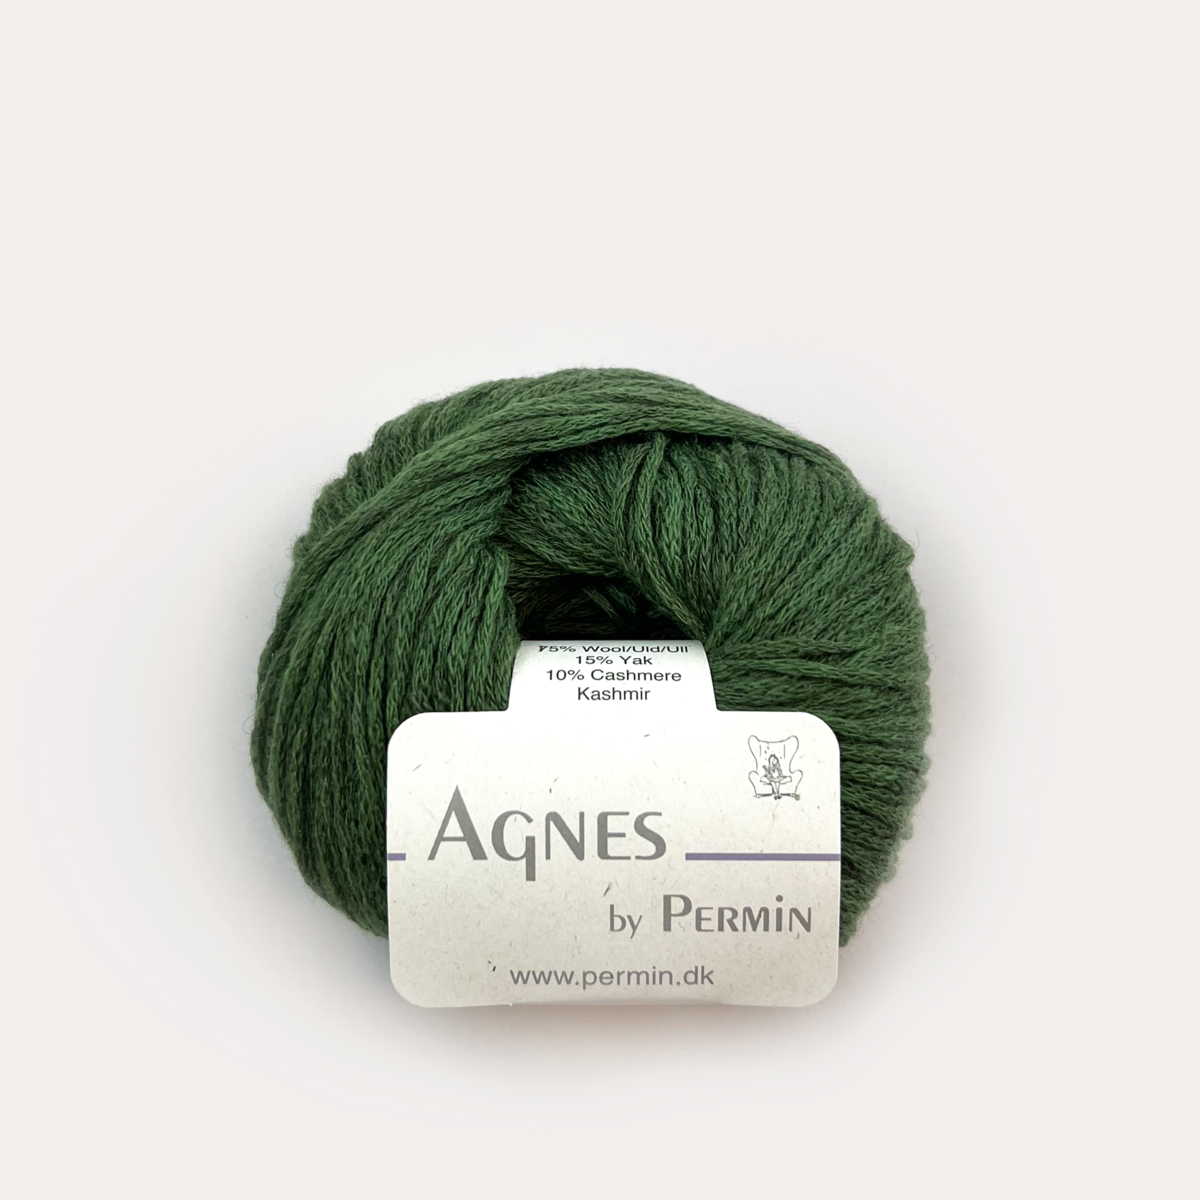 Agnes | by Permin